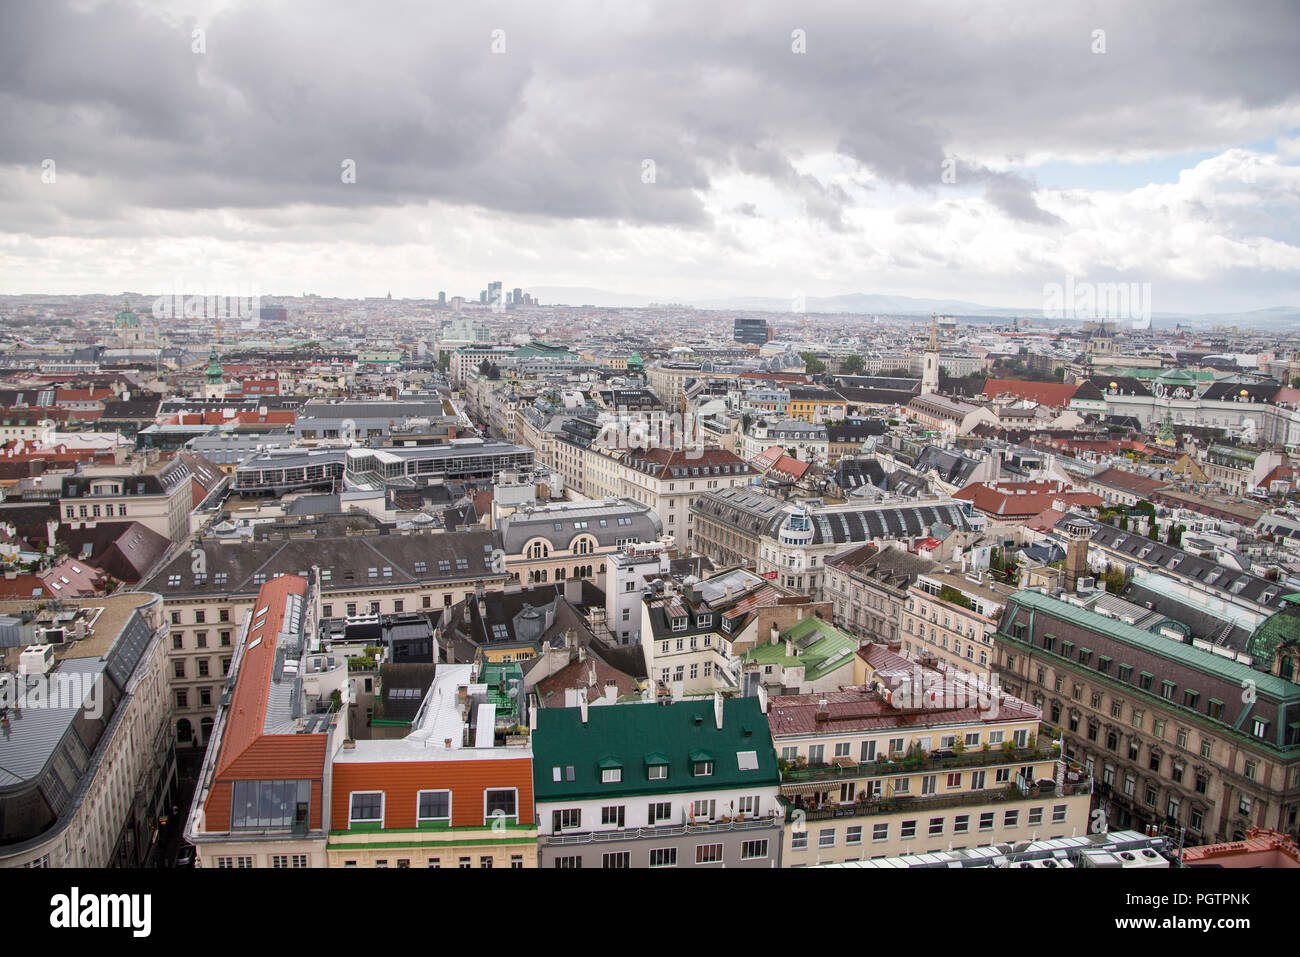 An aerial view of Vienna Austria from the top of the Stephansdom church. Stock Photo